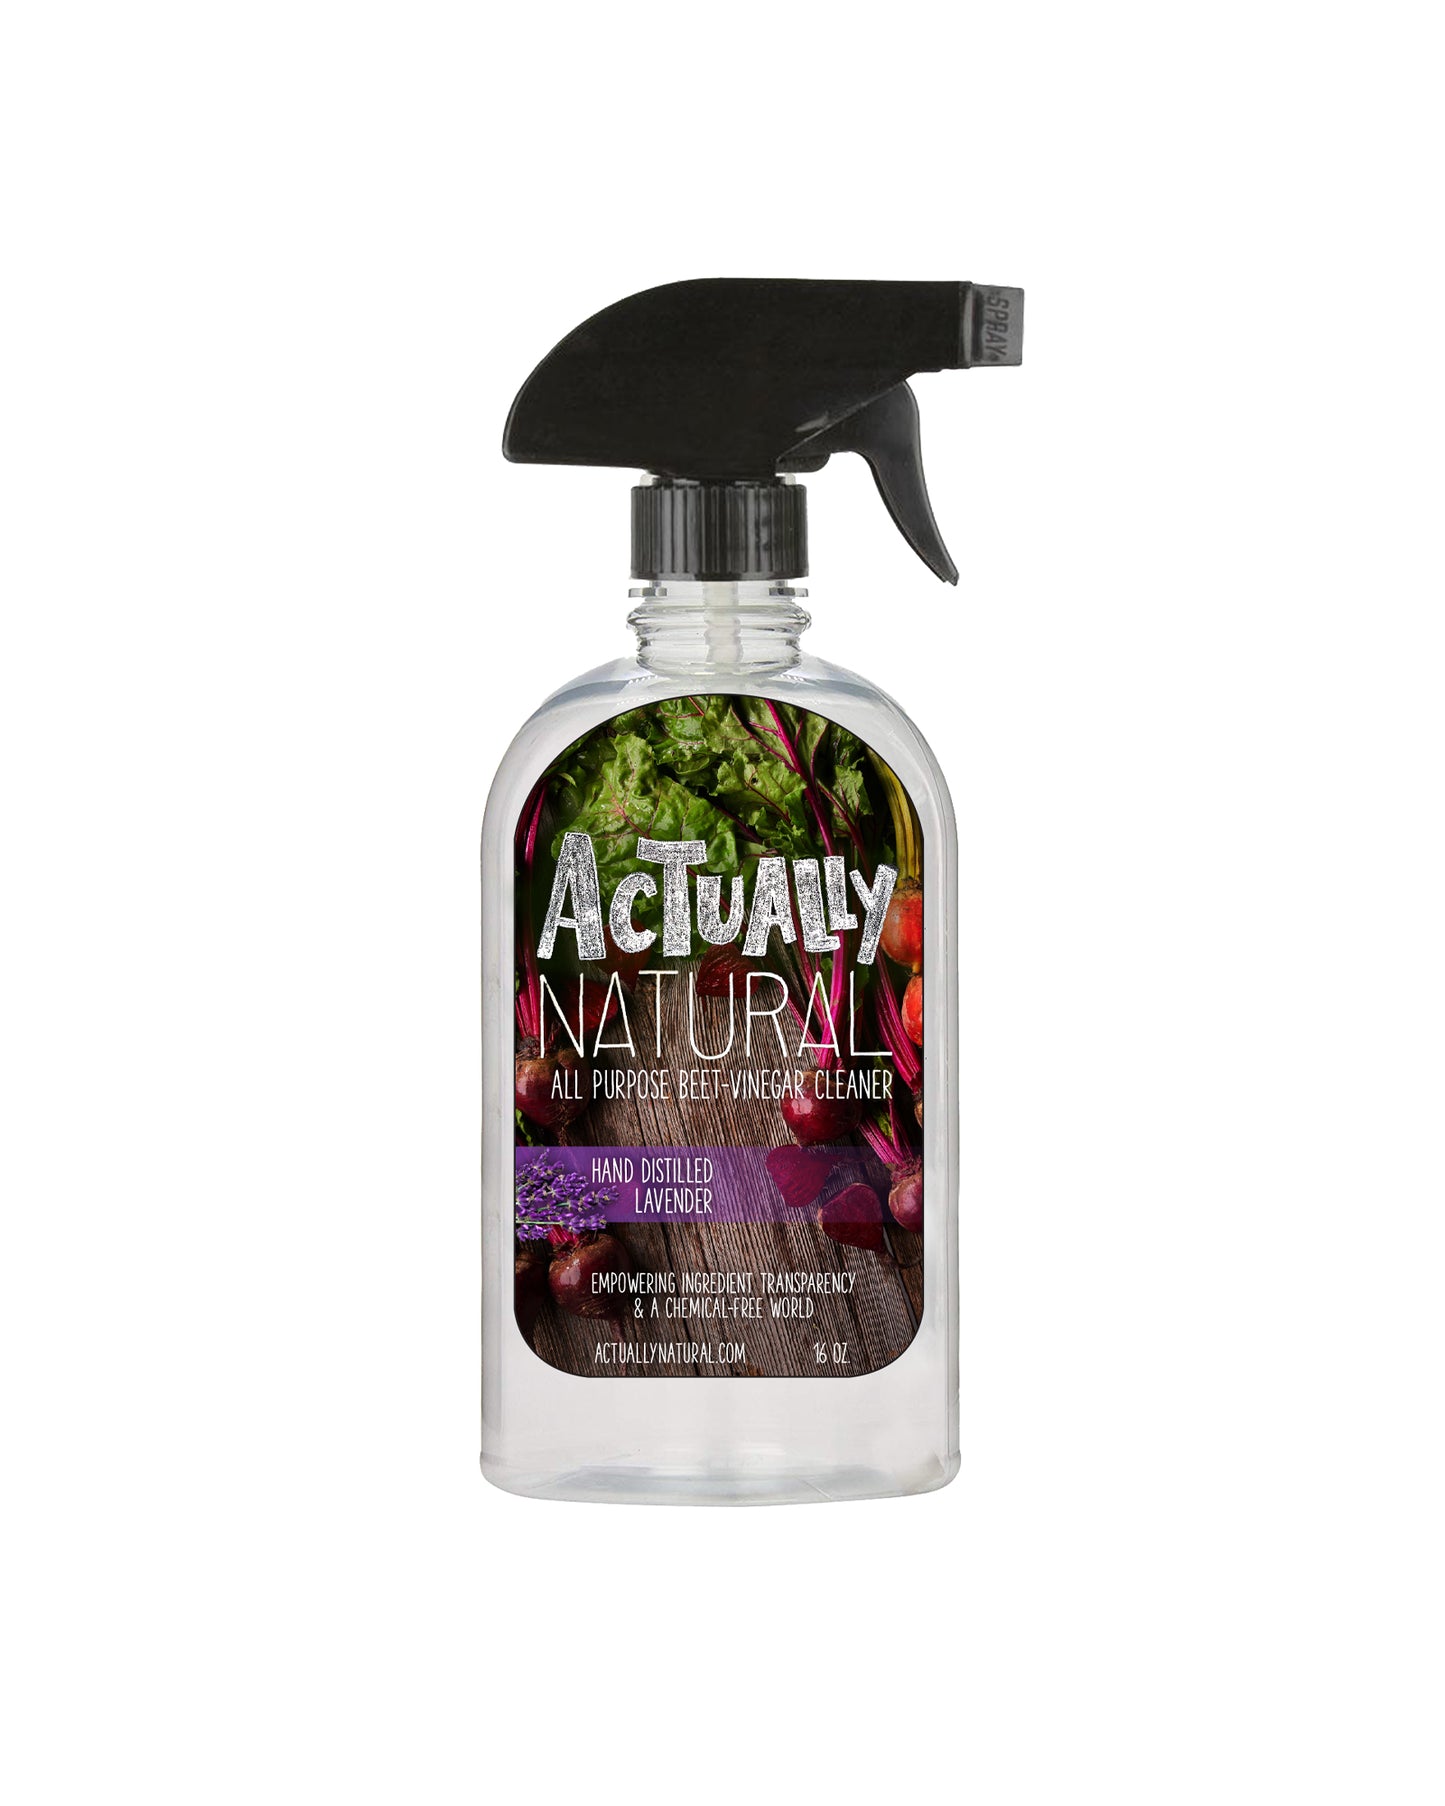 All Purpose Spray by Actually Natural - Hive – Hive Brands